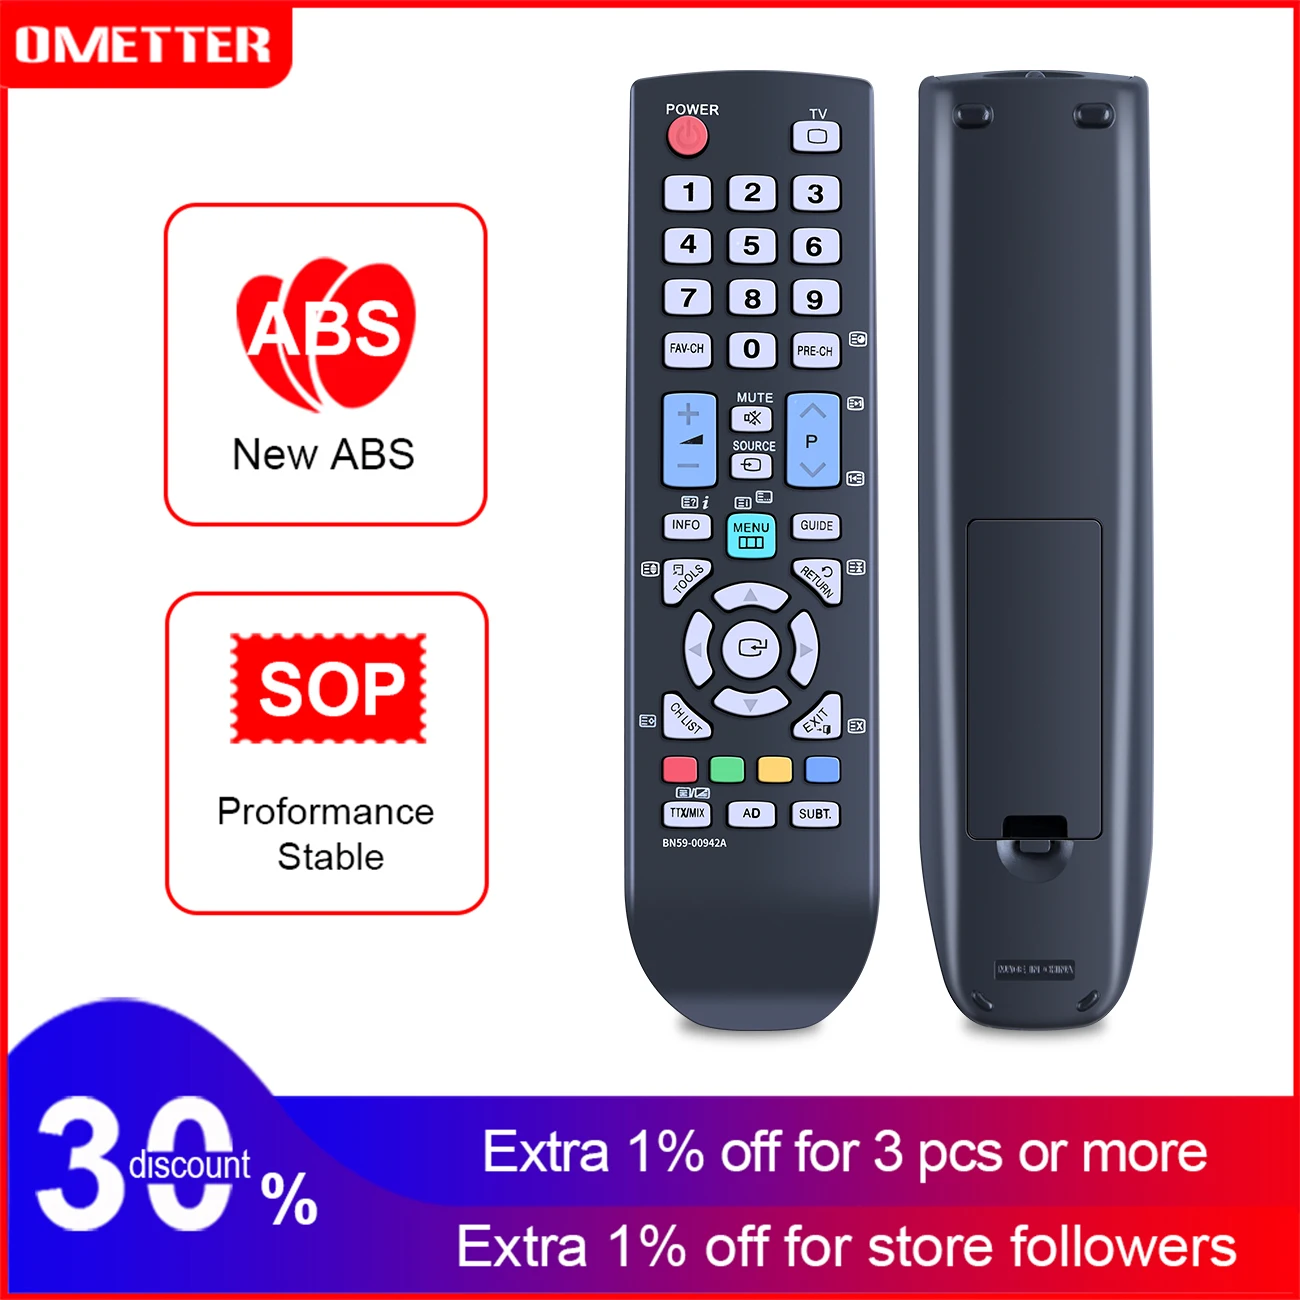 

Smart Remote Control Replacement for Samsung BN59-00865A BN59-00942A AA59-00496A AA59-00743A AA59-00741A TV Remote Control